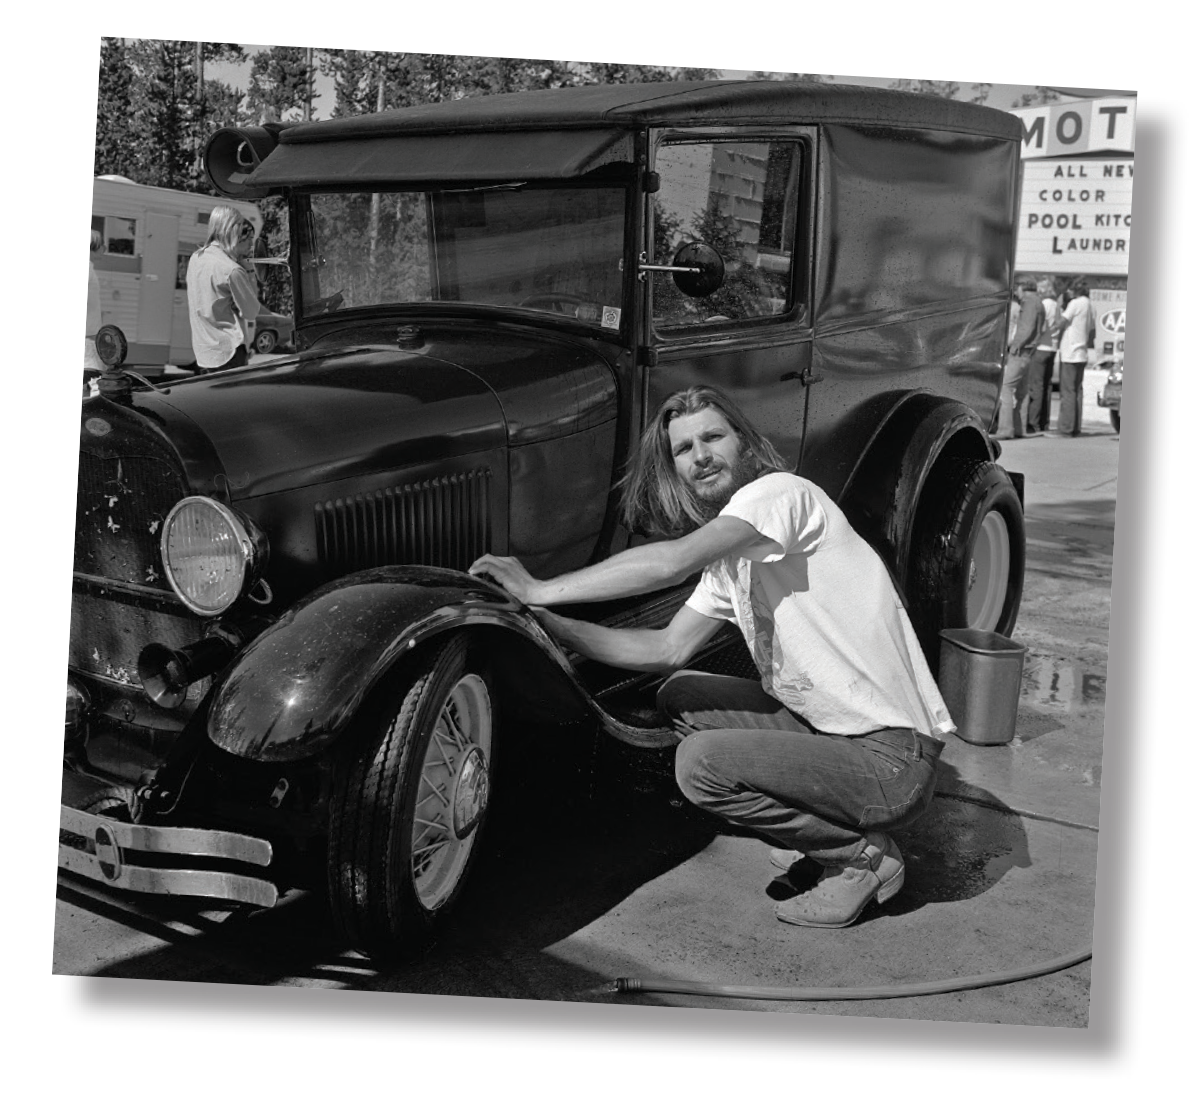 Jake Jacobs with his always-familiar Rat Fink T-shirt is cleaning up his Model A panel while attending the 1972 NSRA Nationals held in Detroit. Anyone from that time remember the manhole covers on 8 Mile Road? Now there are some stories.